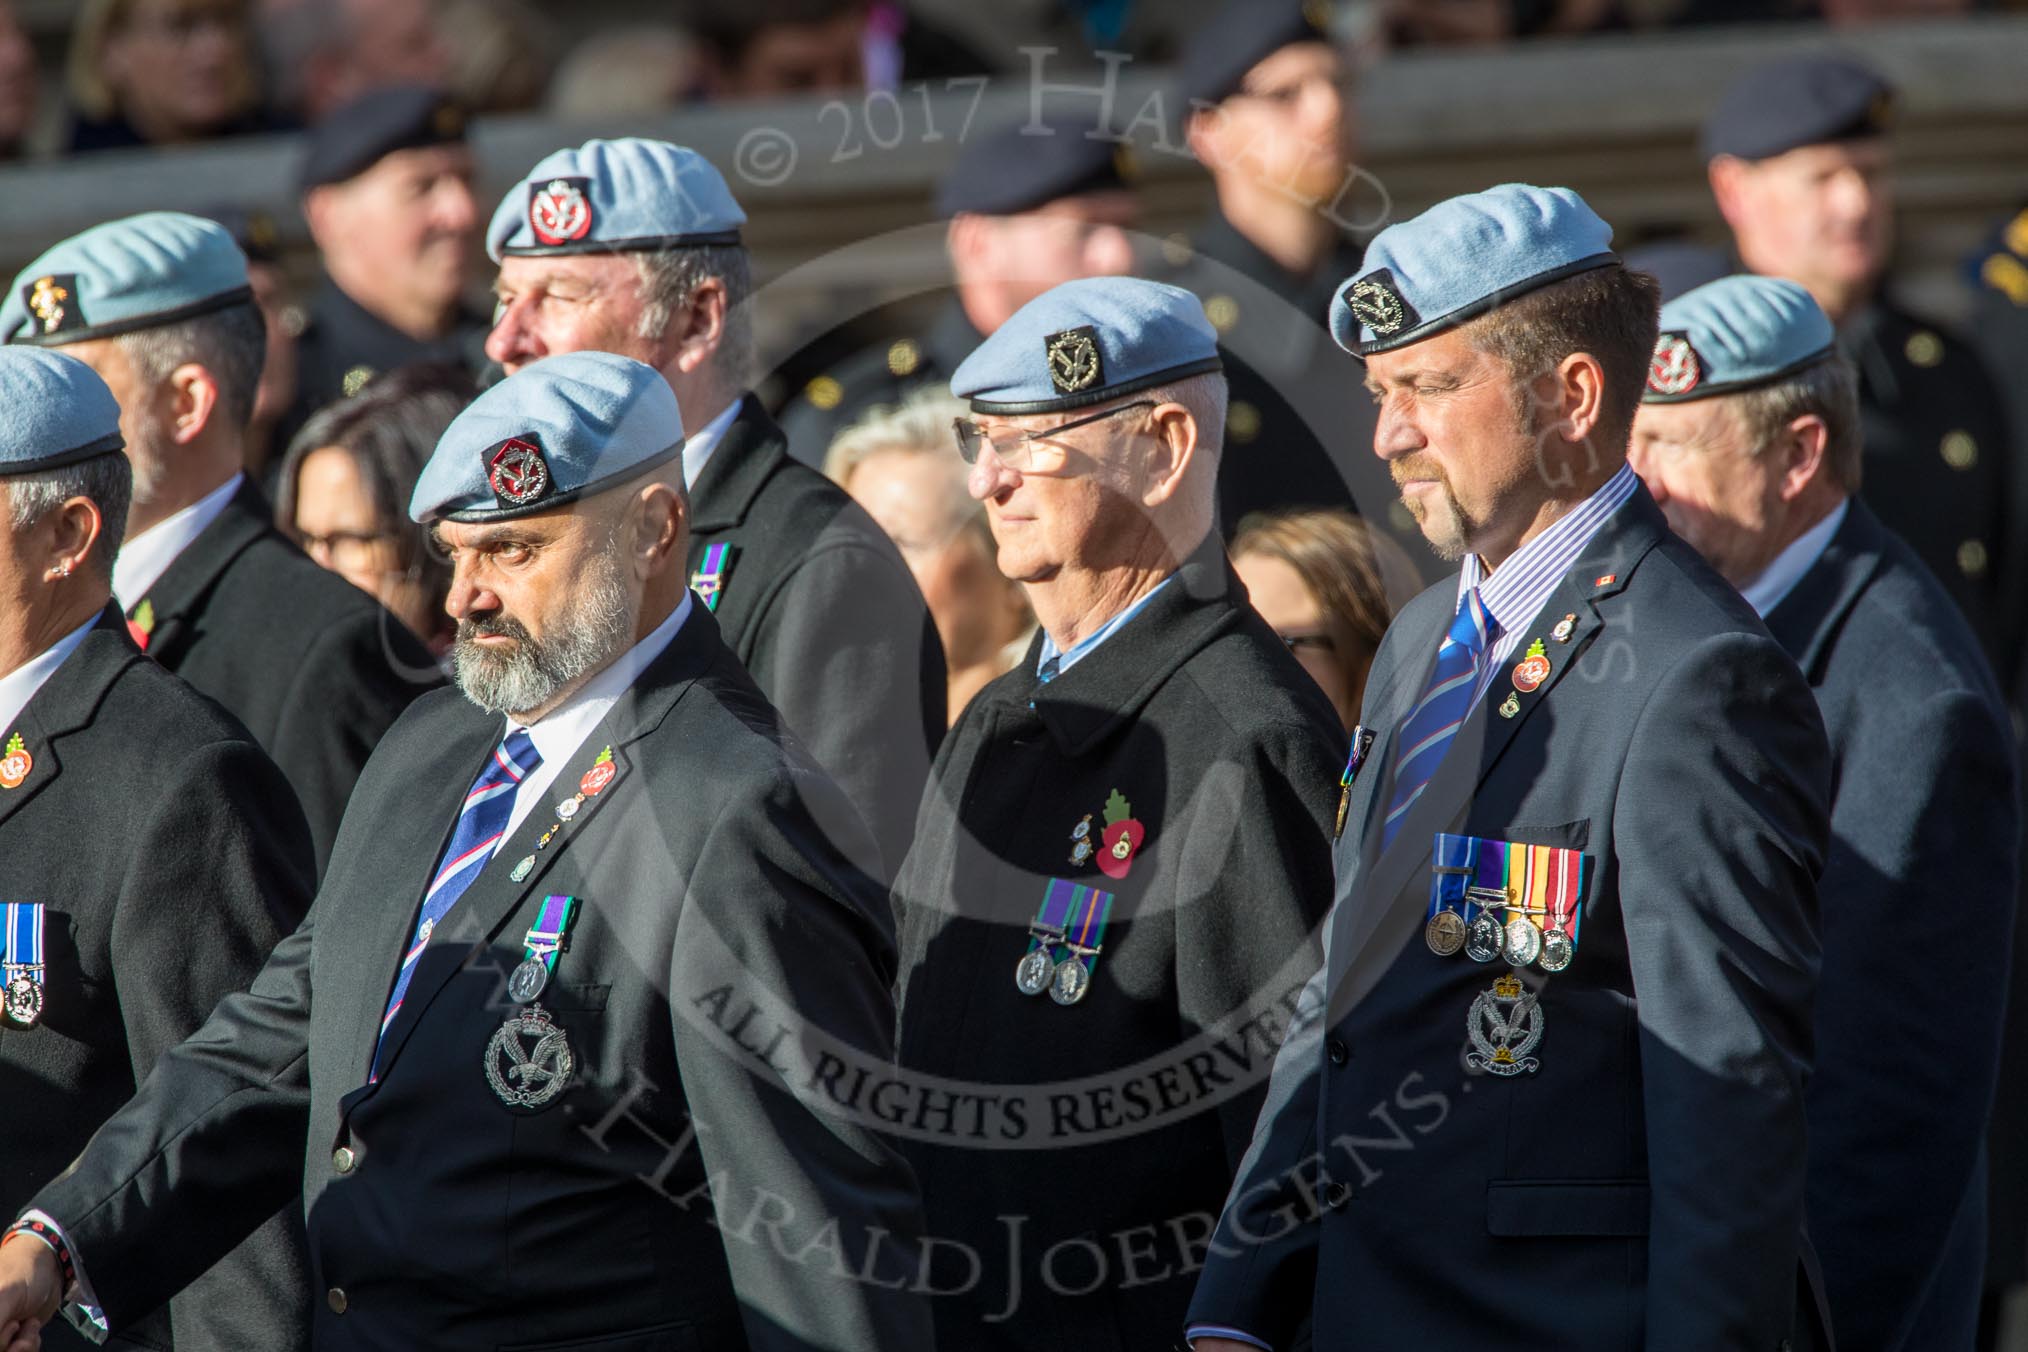 Army Air Corps Veteran Association (Group B7, 42 members) during the Royal British Legion March Past on Remembrance Sunday at the Cenotaph, Whitehall, Westminster, London, 11 November 2018, 12:07.